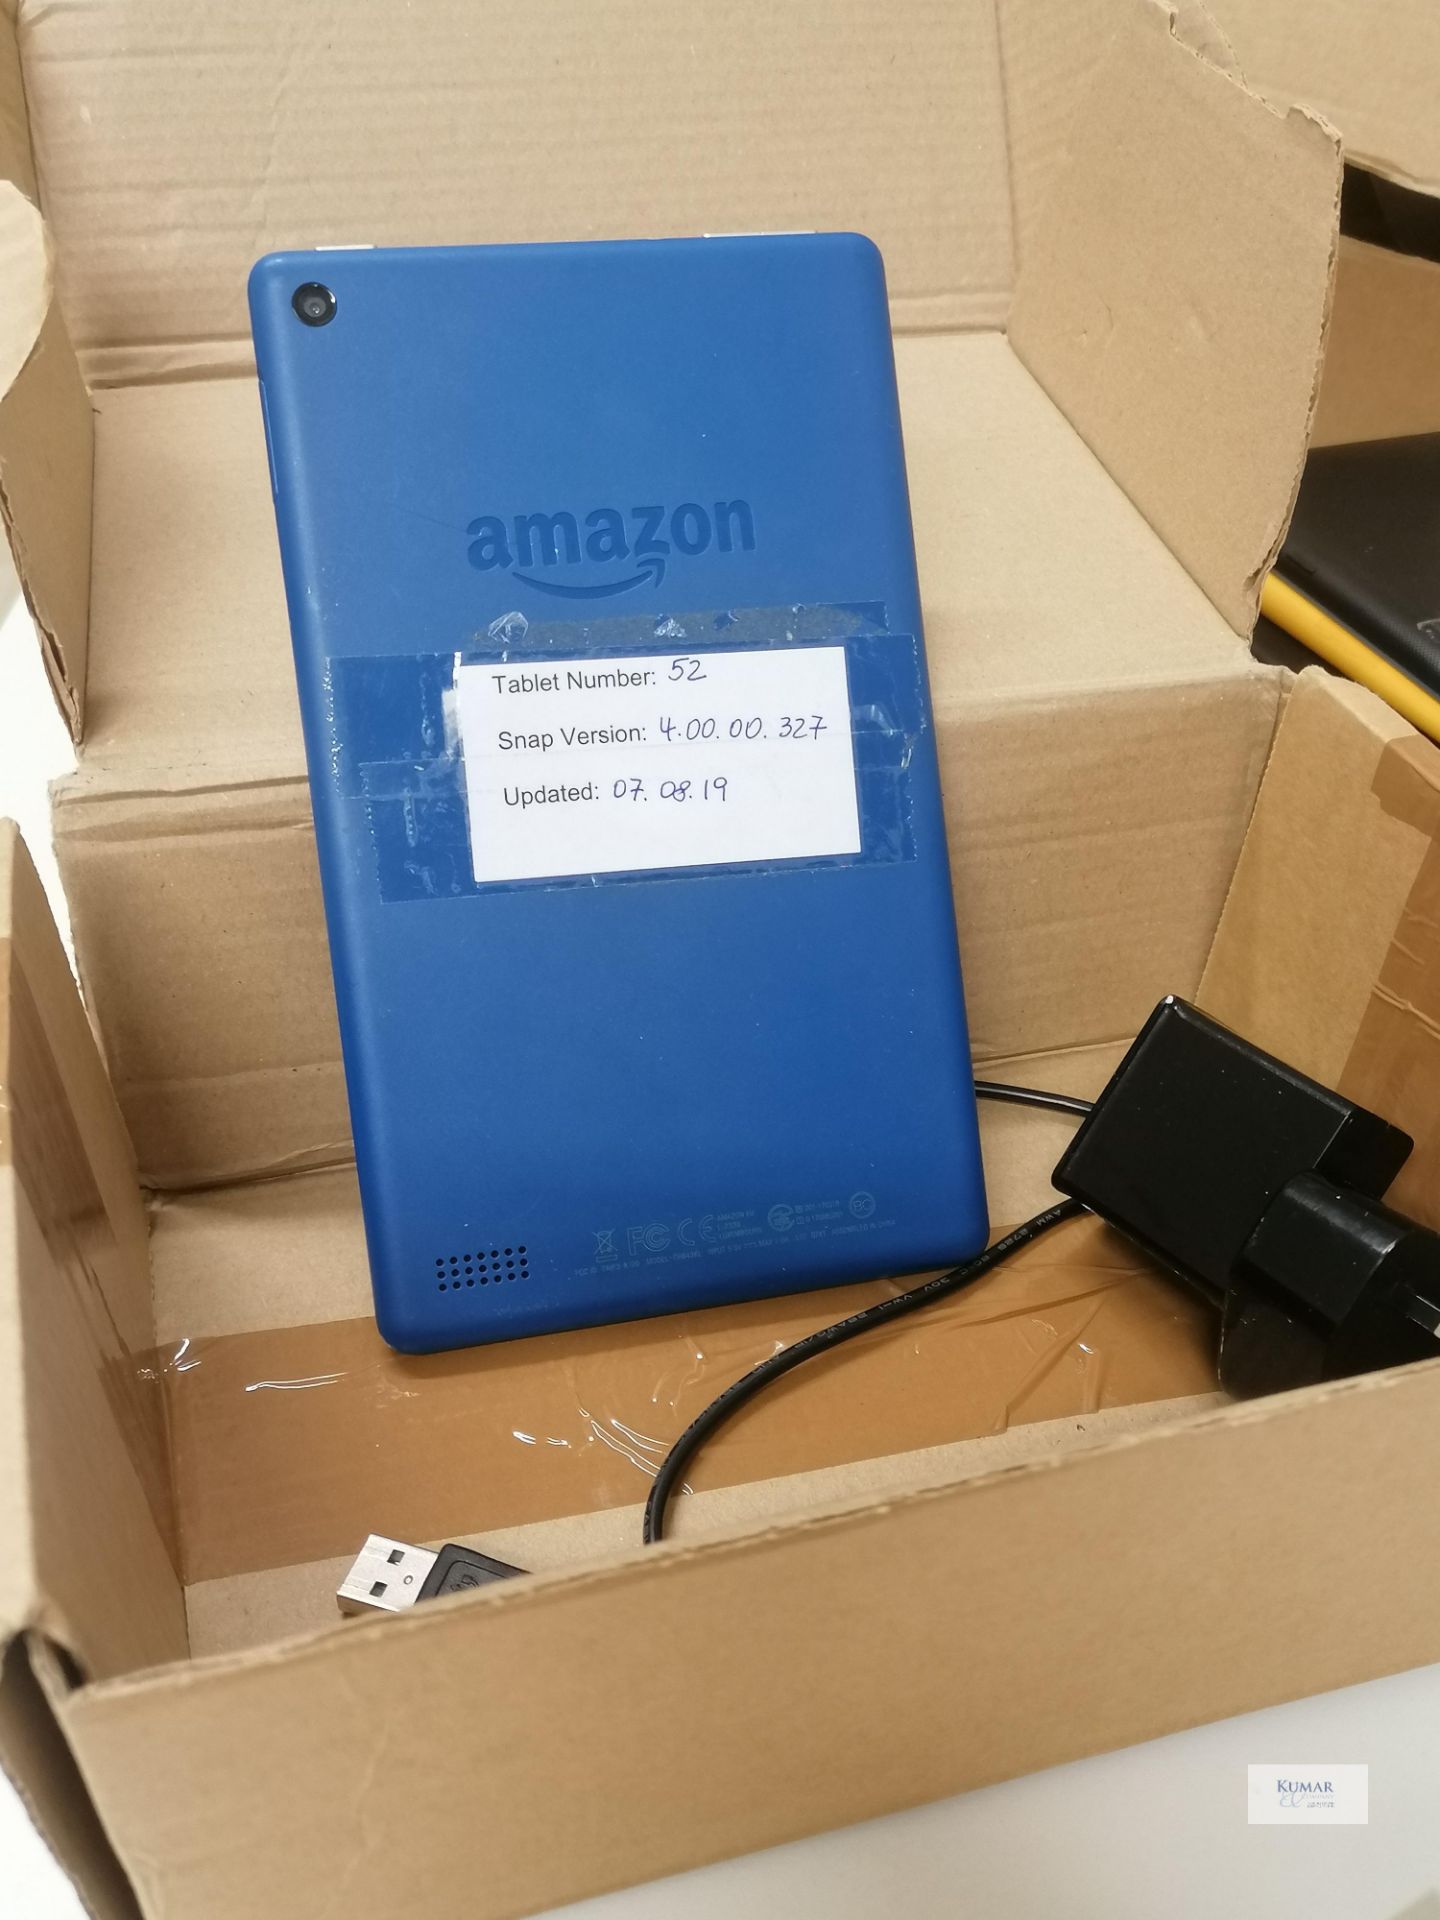 Amazon Fire 7.7" Touch screen Model No SRO43KL Updated 07 08 2019 Cable and charger - Image 2 of 3